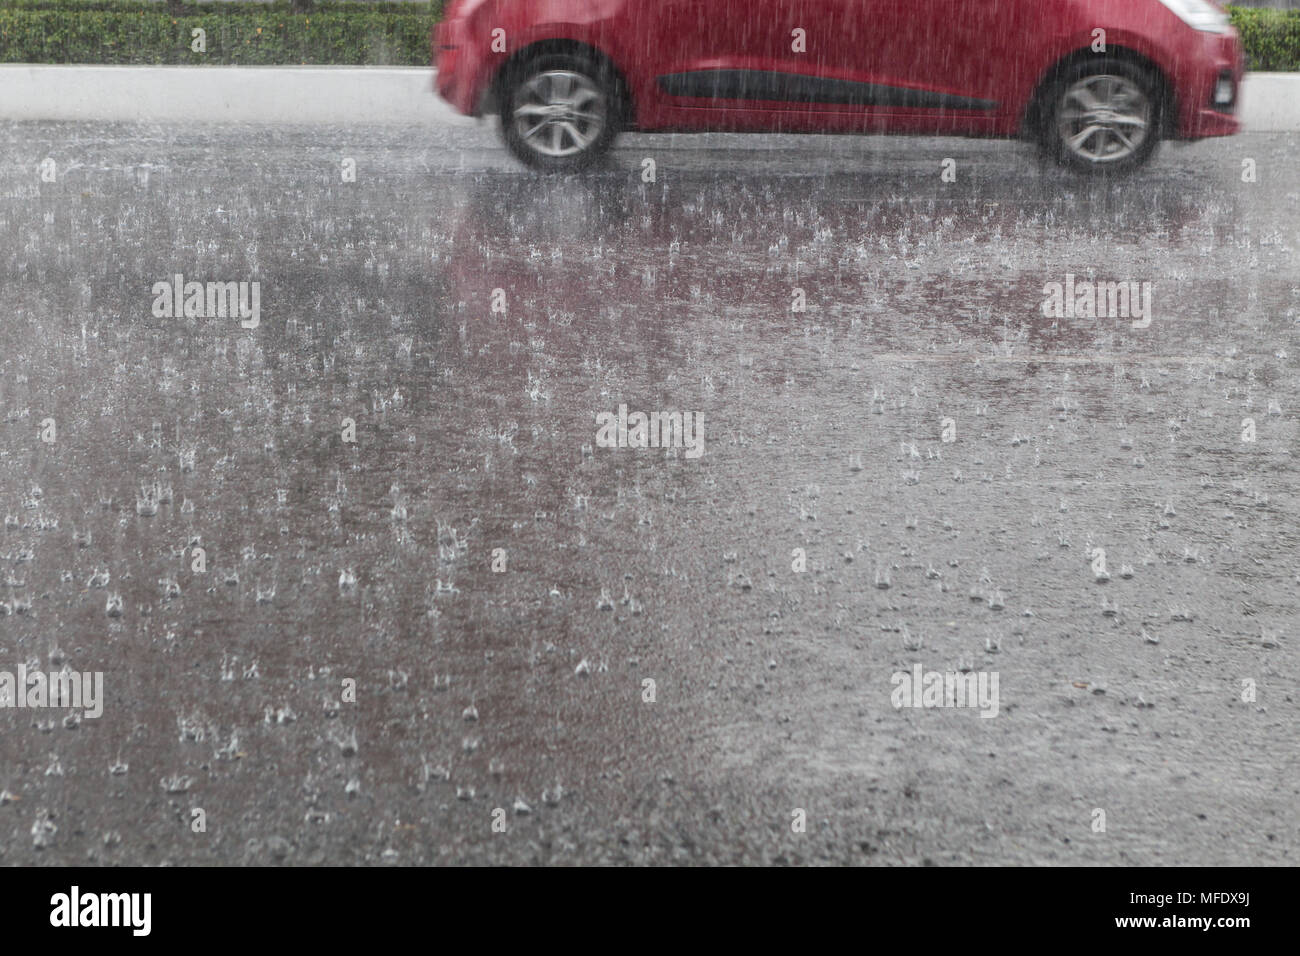 Heavy rain on the street, car driving in the background Stock Photo